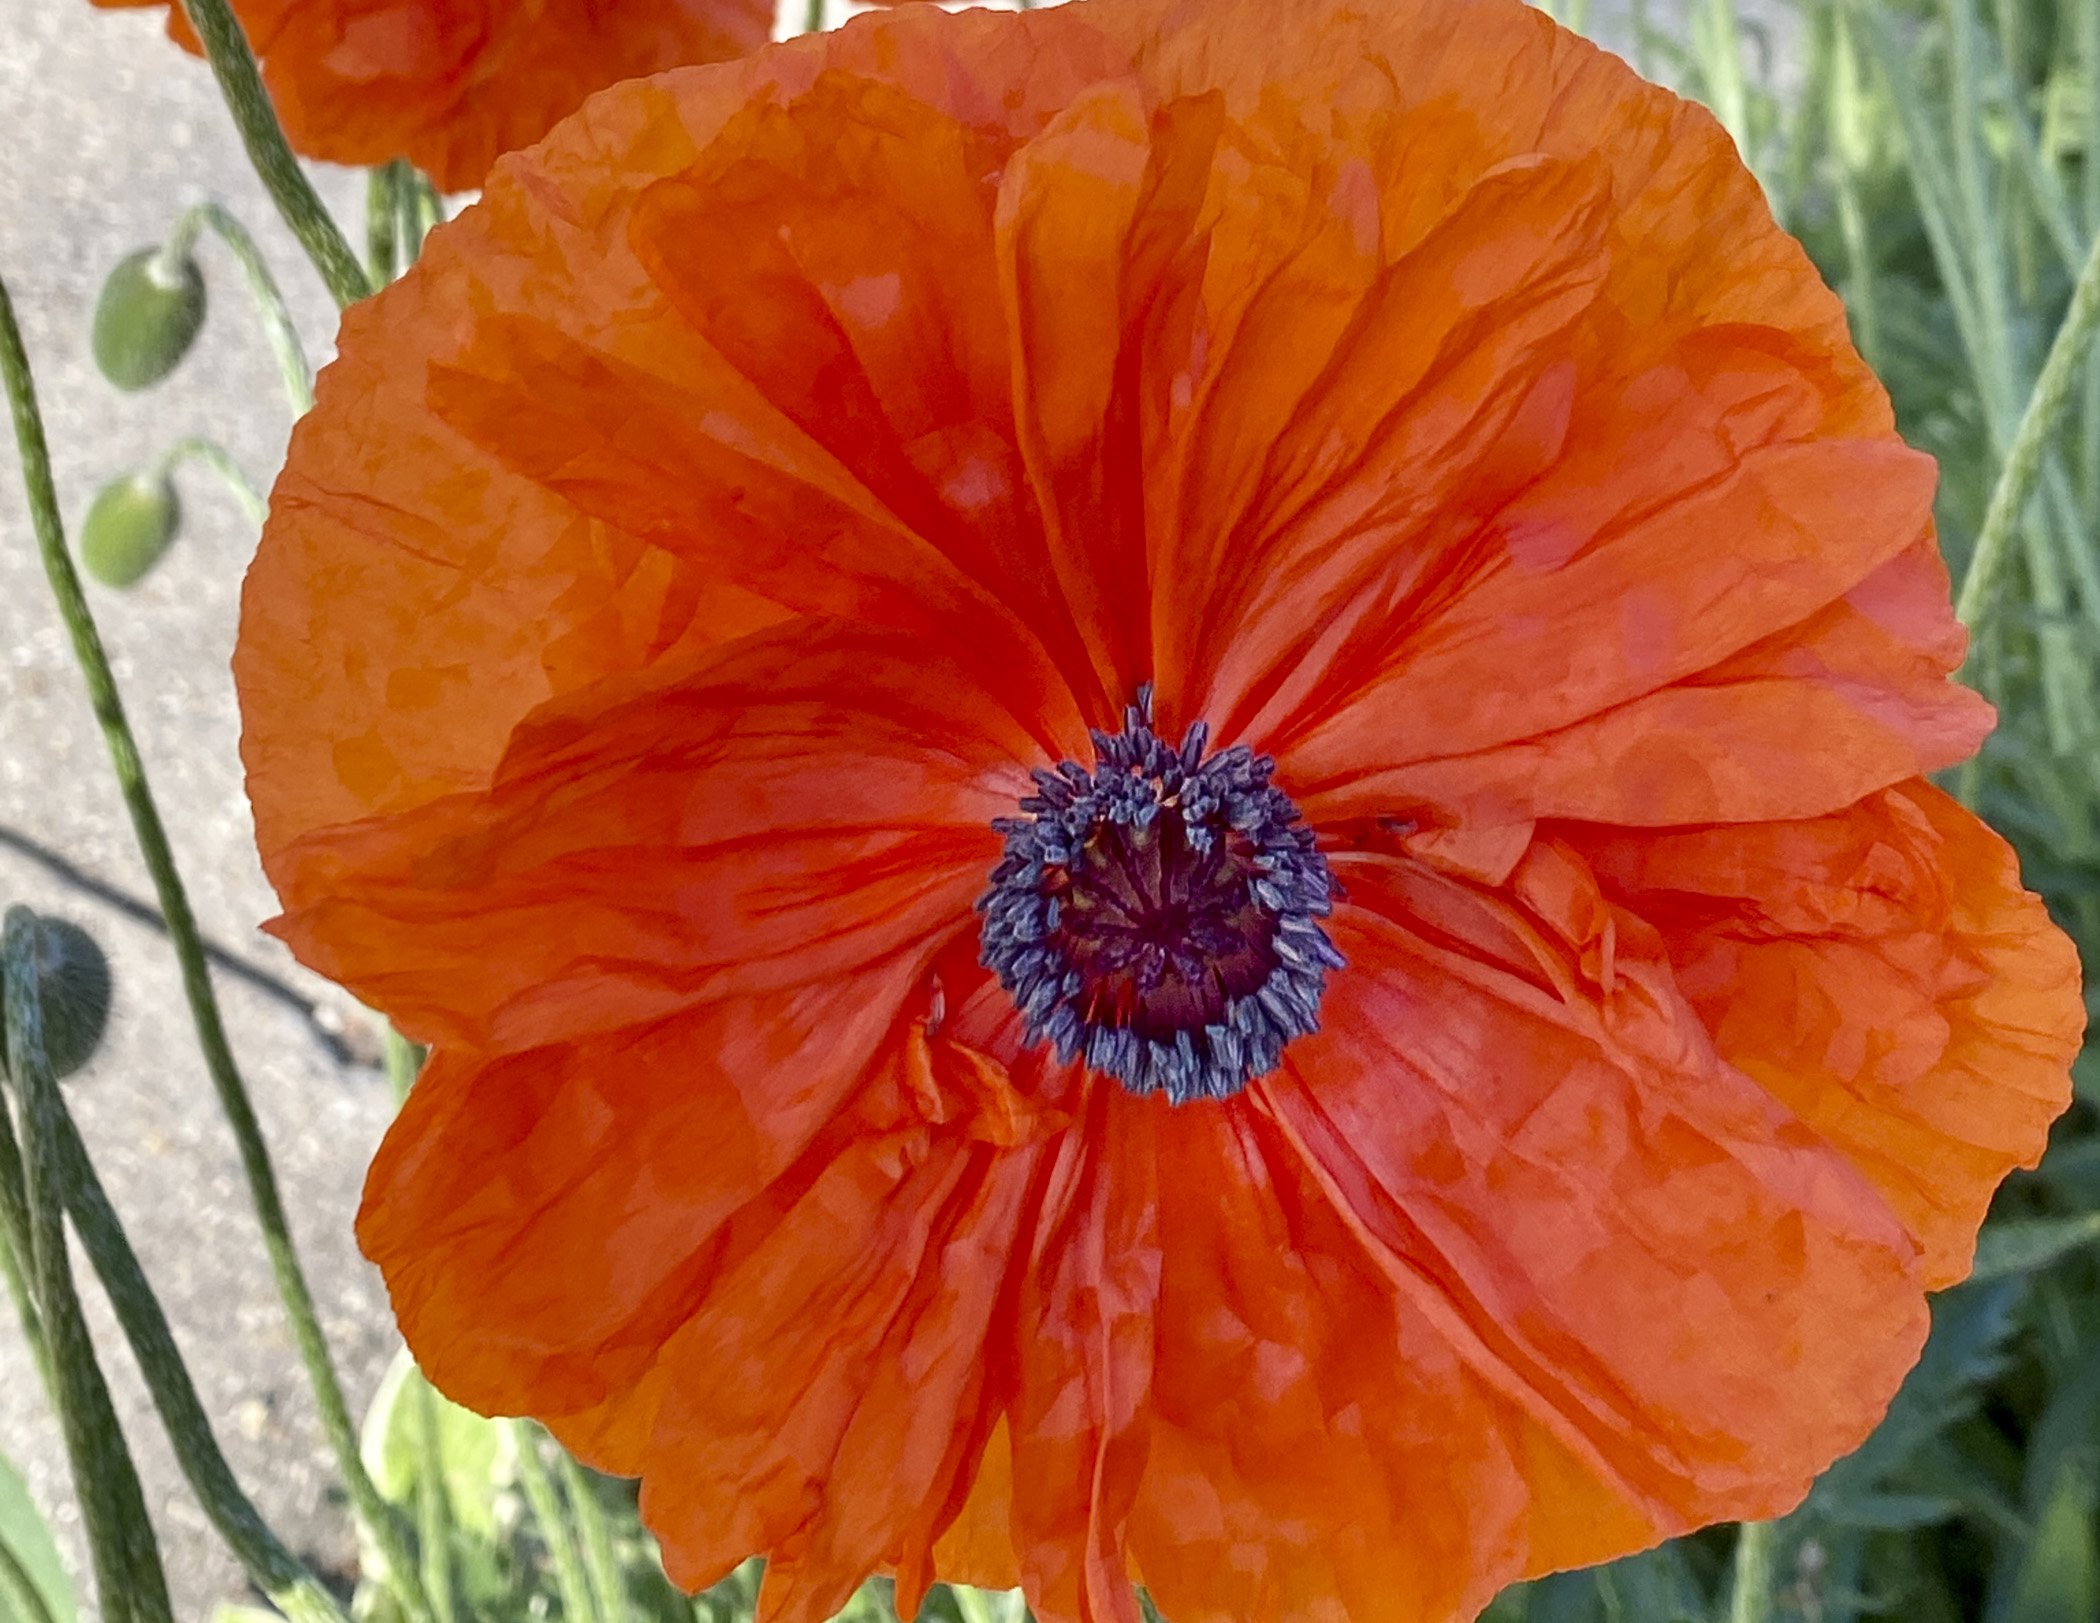 3rd place - Spring Poppy - Phyllis Bankier